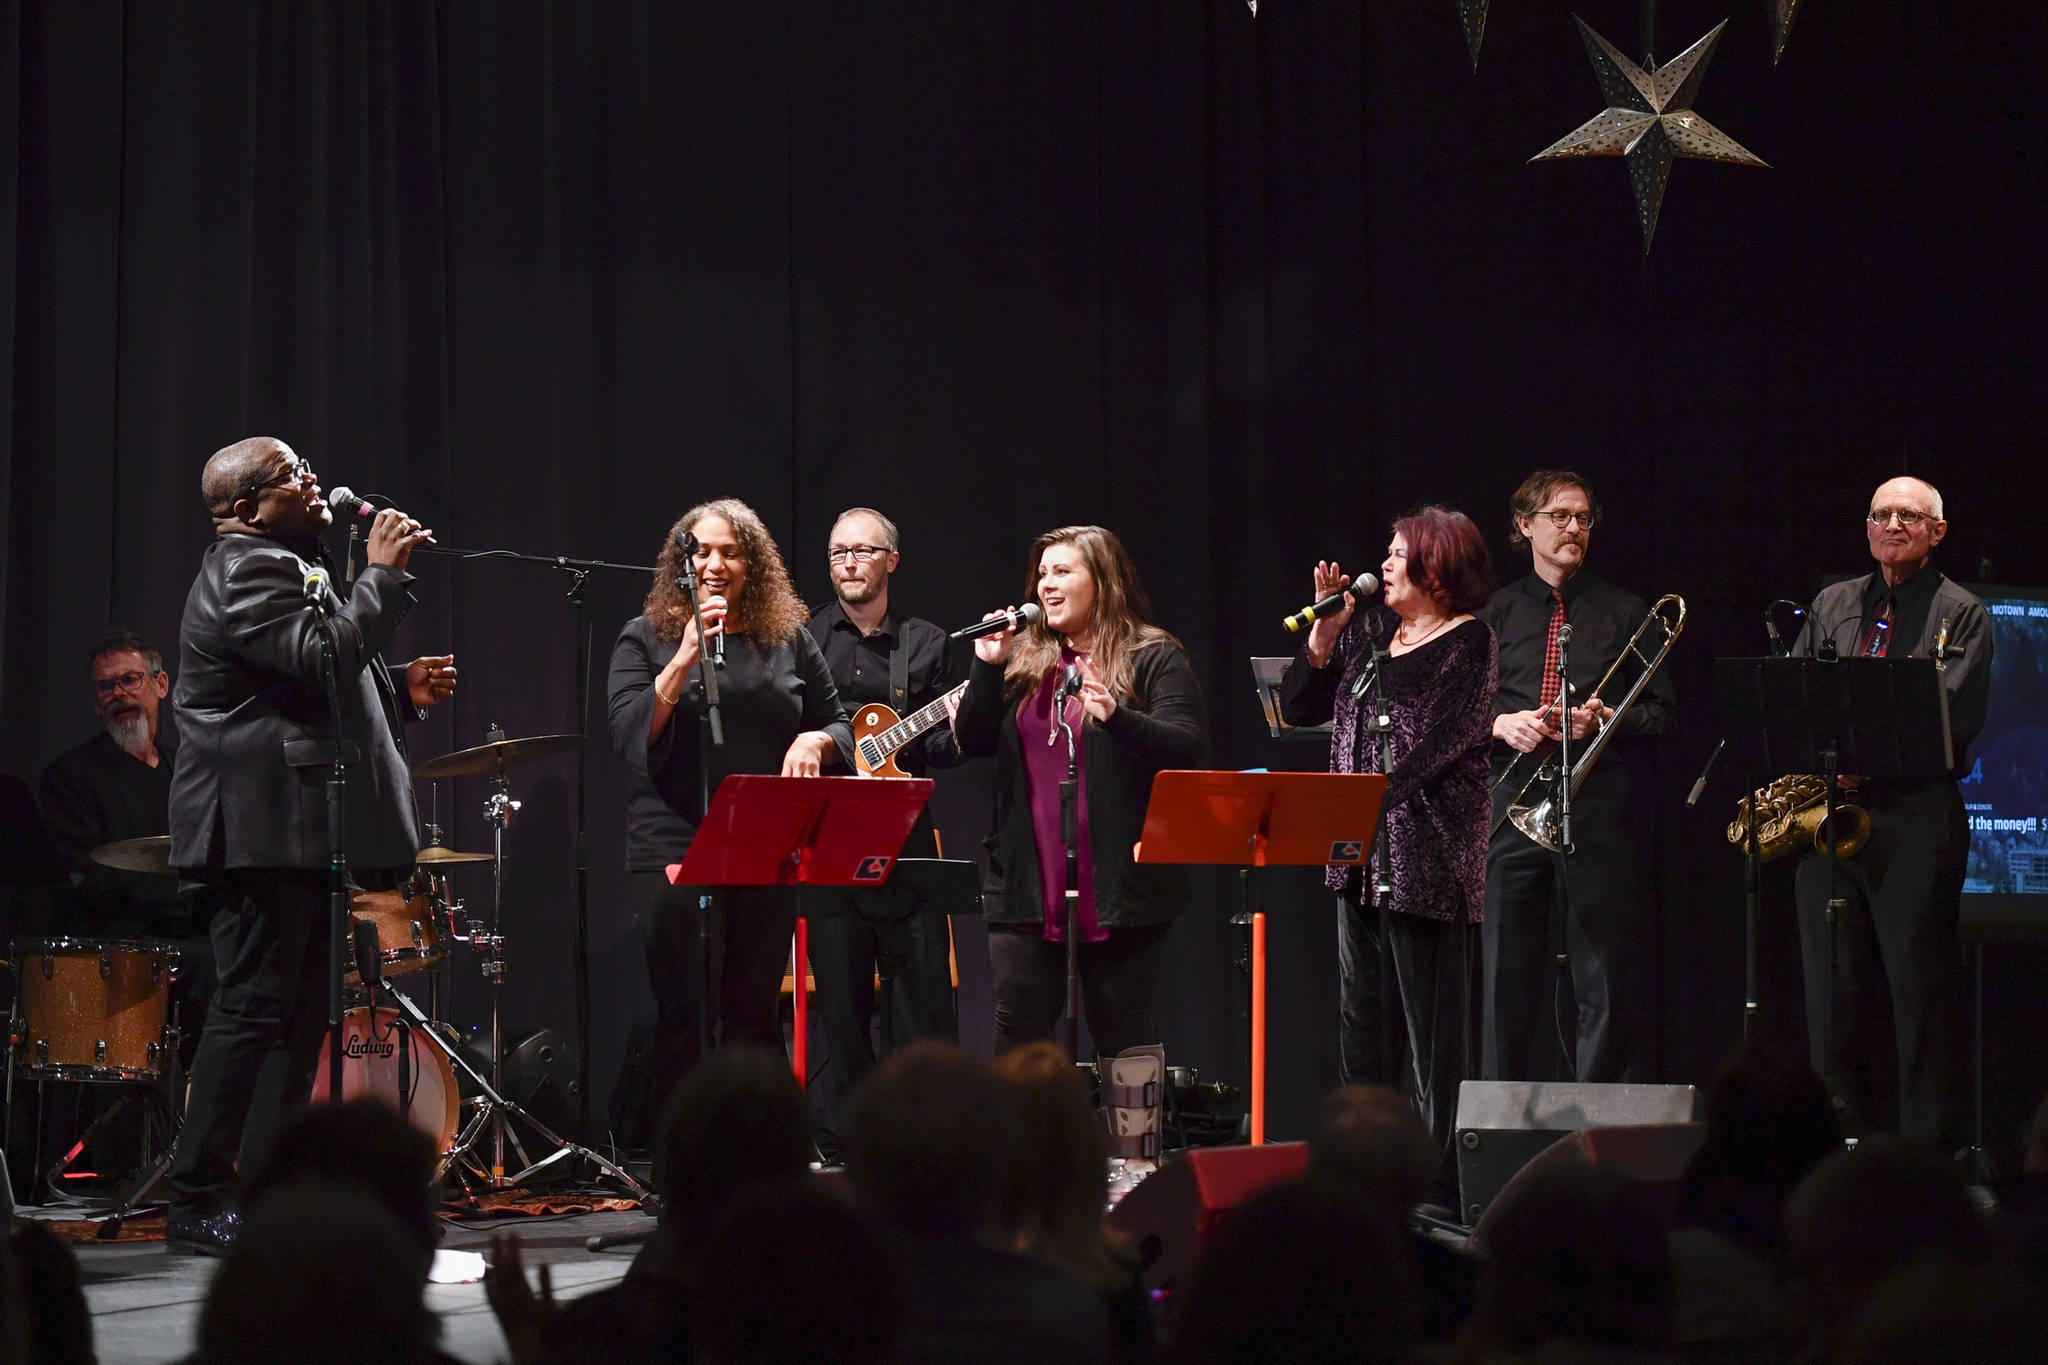 Performance of “Motown for Our Town” featuring Ryan Shaw, Bobby Lewis, Eustace Johnson, Jaunelle Celaire and others at the Juneau Arts & Culture Center on Friday, March 1, 2019. (Michael Penn | Juneau Empire)